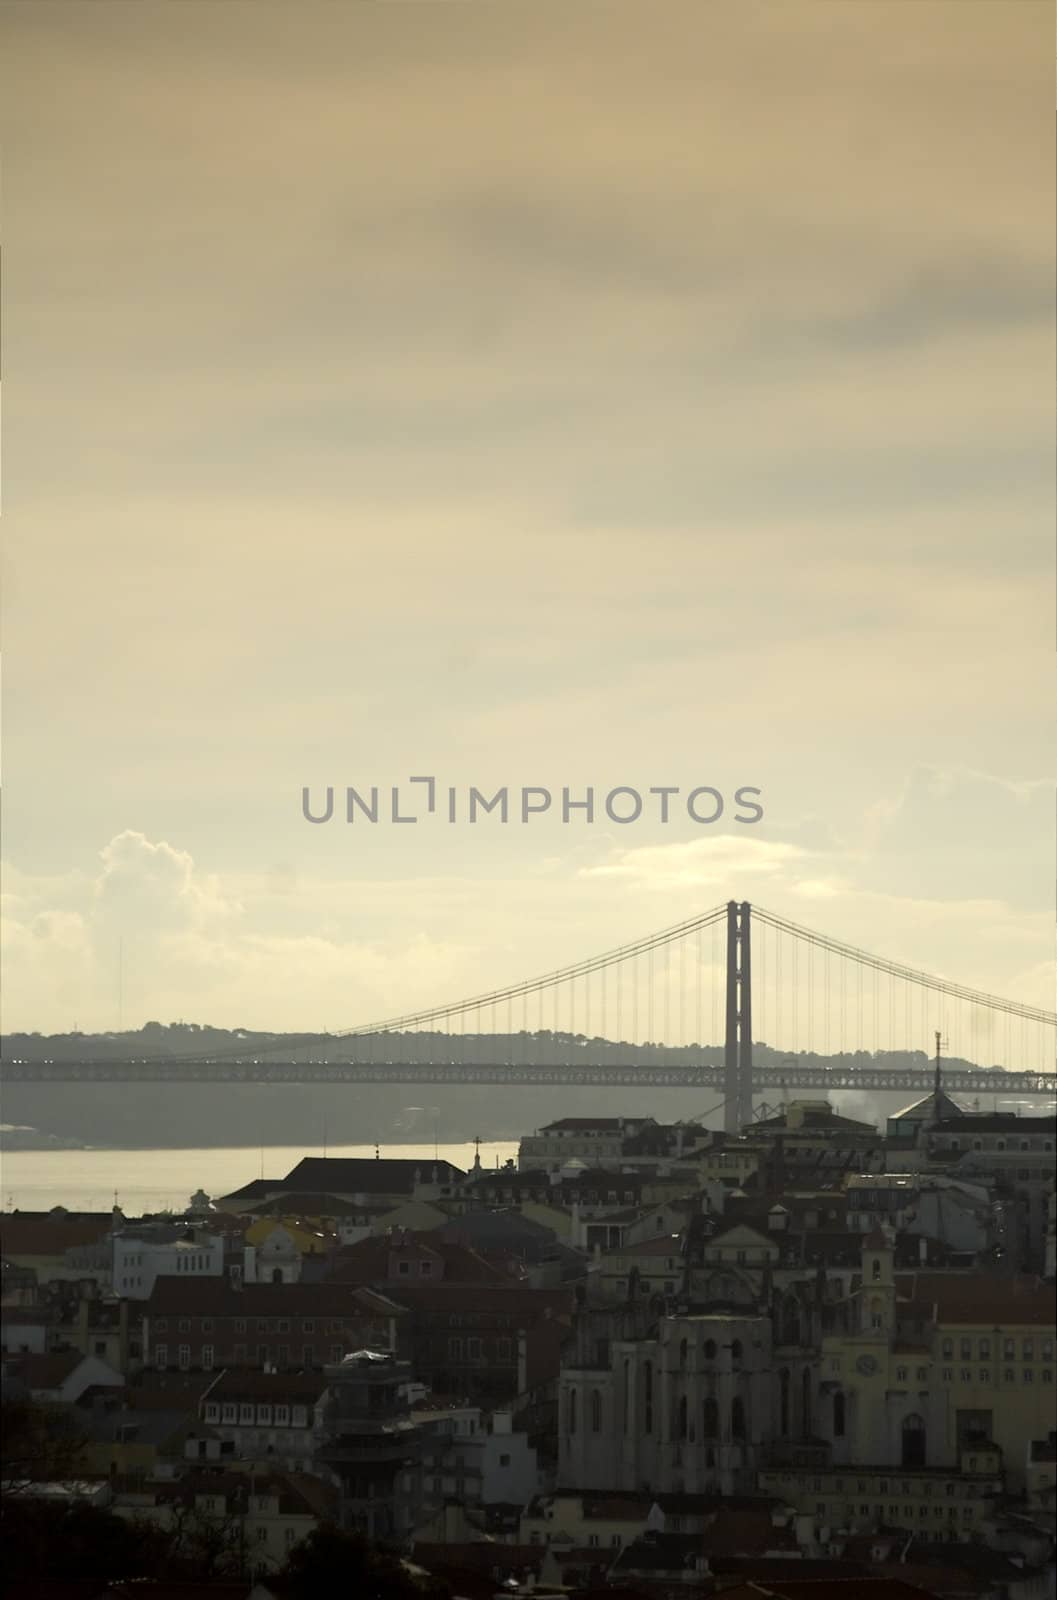 View of Lisbon's Chiado quarter with April 25th bridge on the background